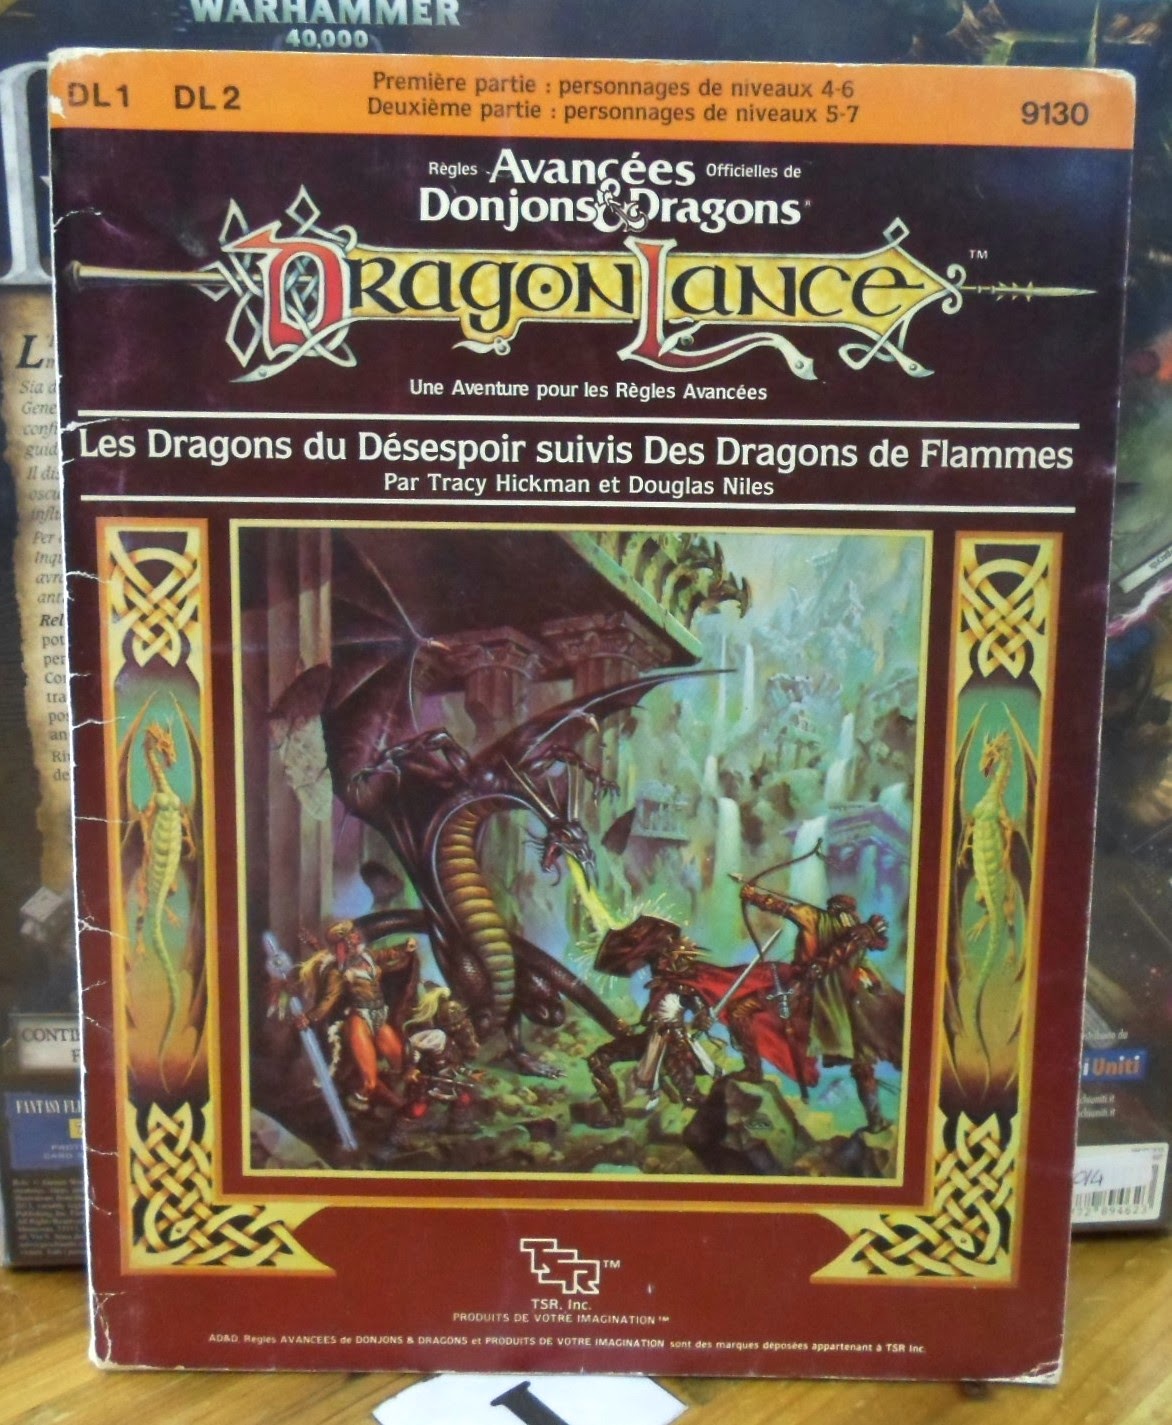 The Very Rare French Edition of AD&D 1st Edition Dragonlance Series